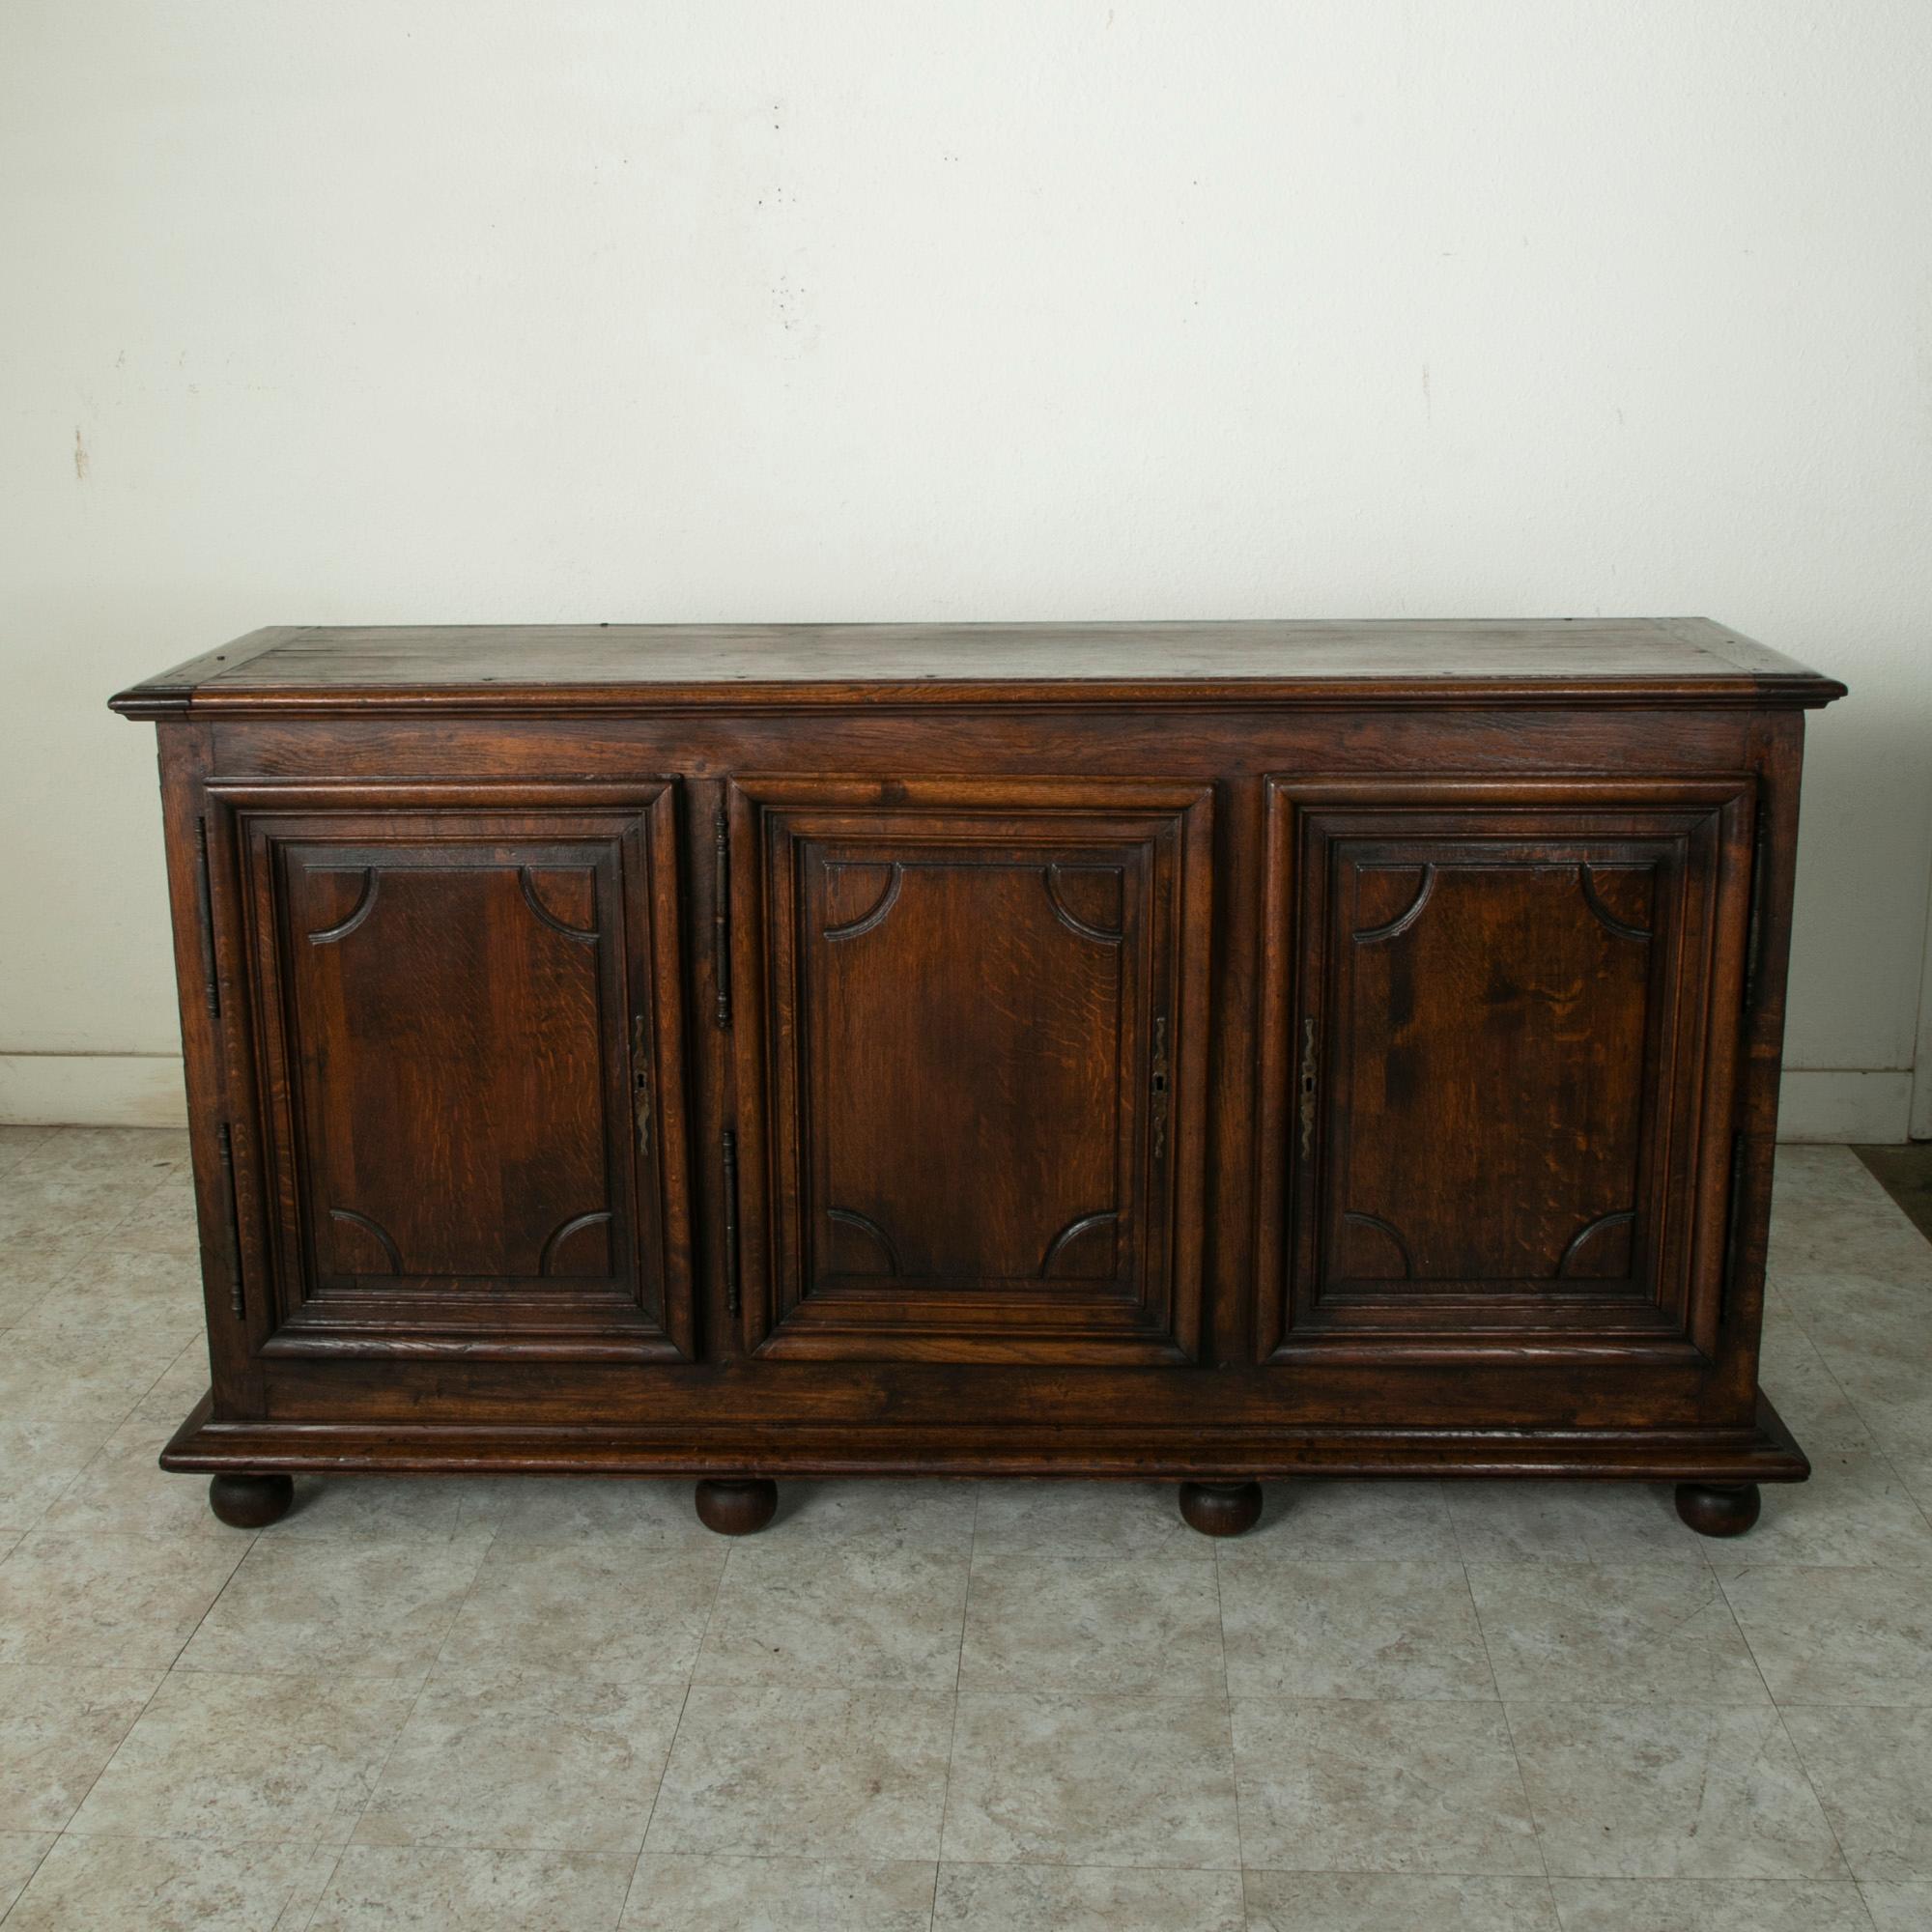 This late eighteenth century French oak enfilade features hand pegged paneled sides and doors, and a beveled top. its three doors display Louis XIV design elements with symmetrical rectangular panels. Behind each door is a single drawer of dovetail